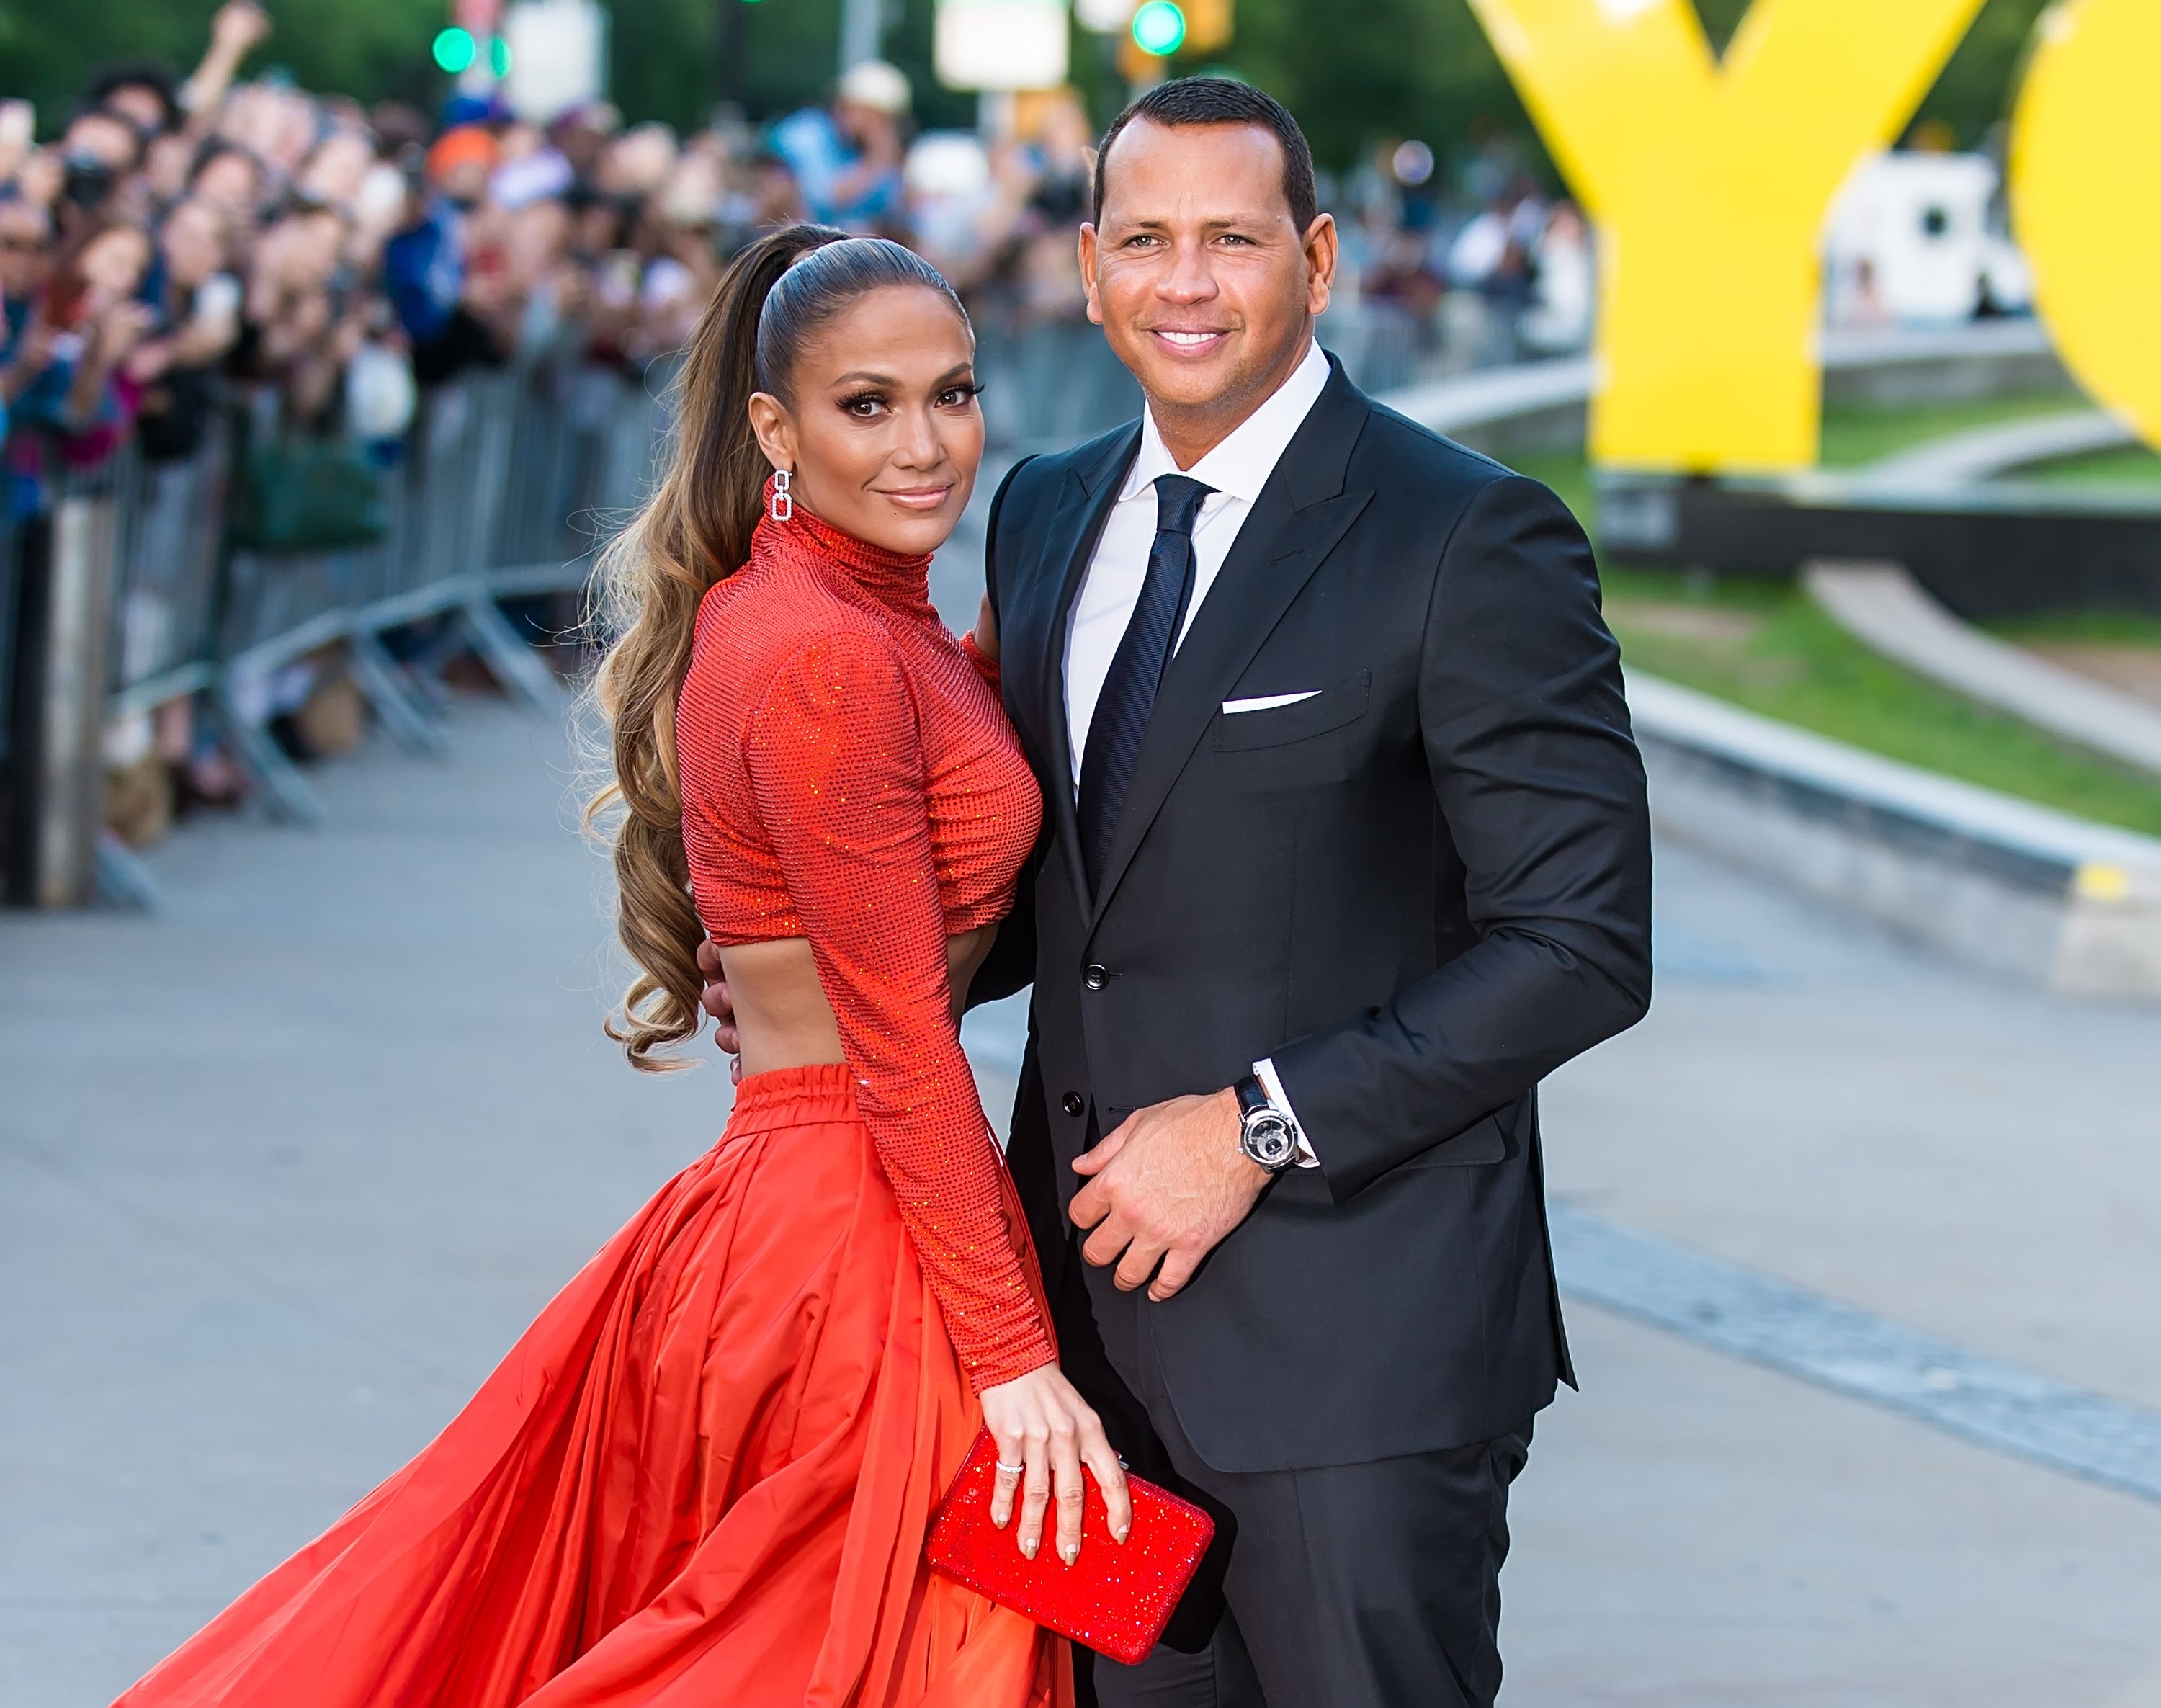 Alex Rodriguez and Jennifer Lopez attends the 2019 CFDA Fashion Awards in Brooklyn Museum. | Photo: Getty Images